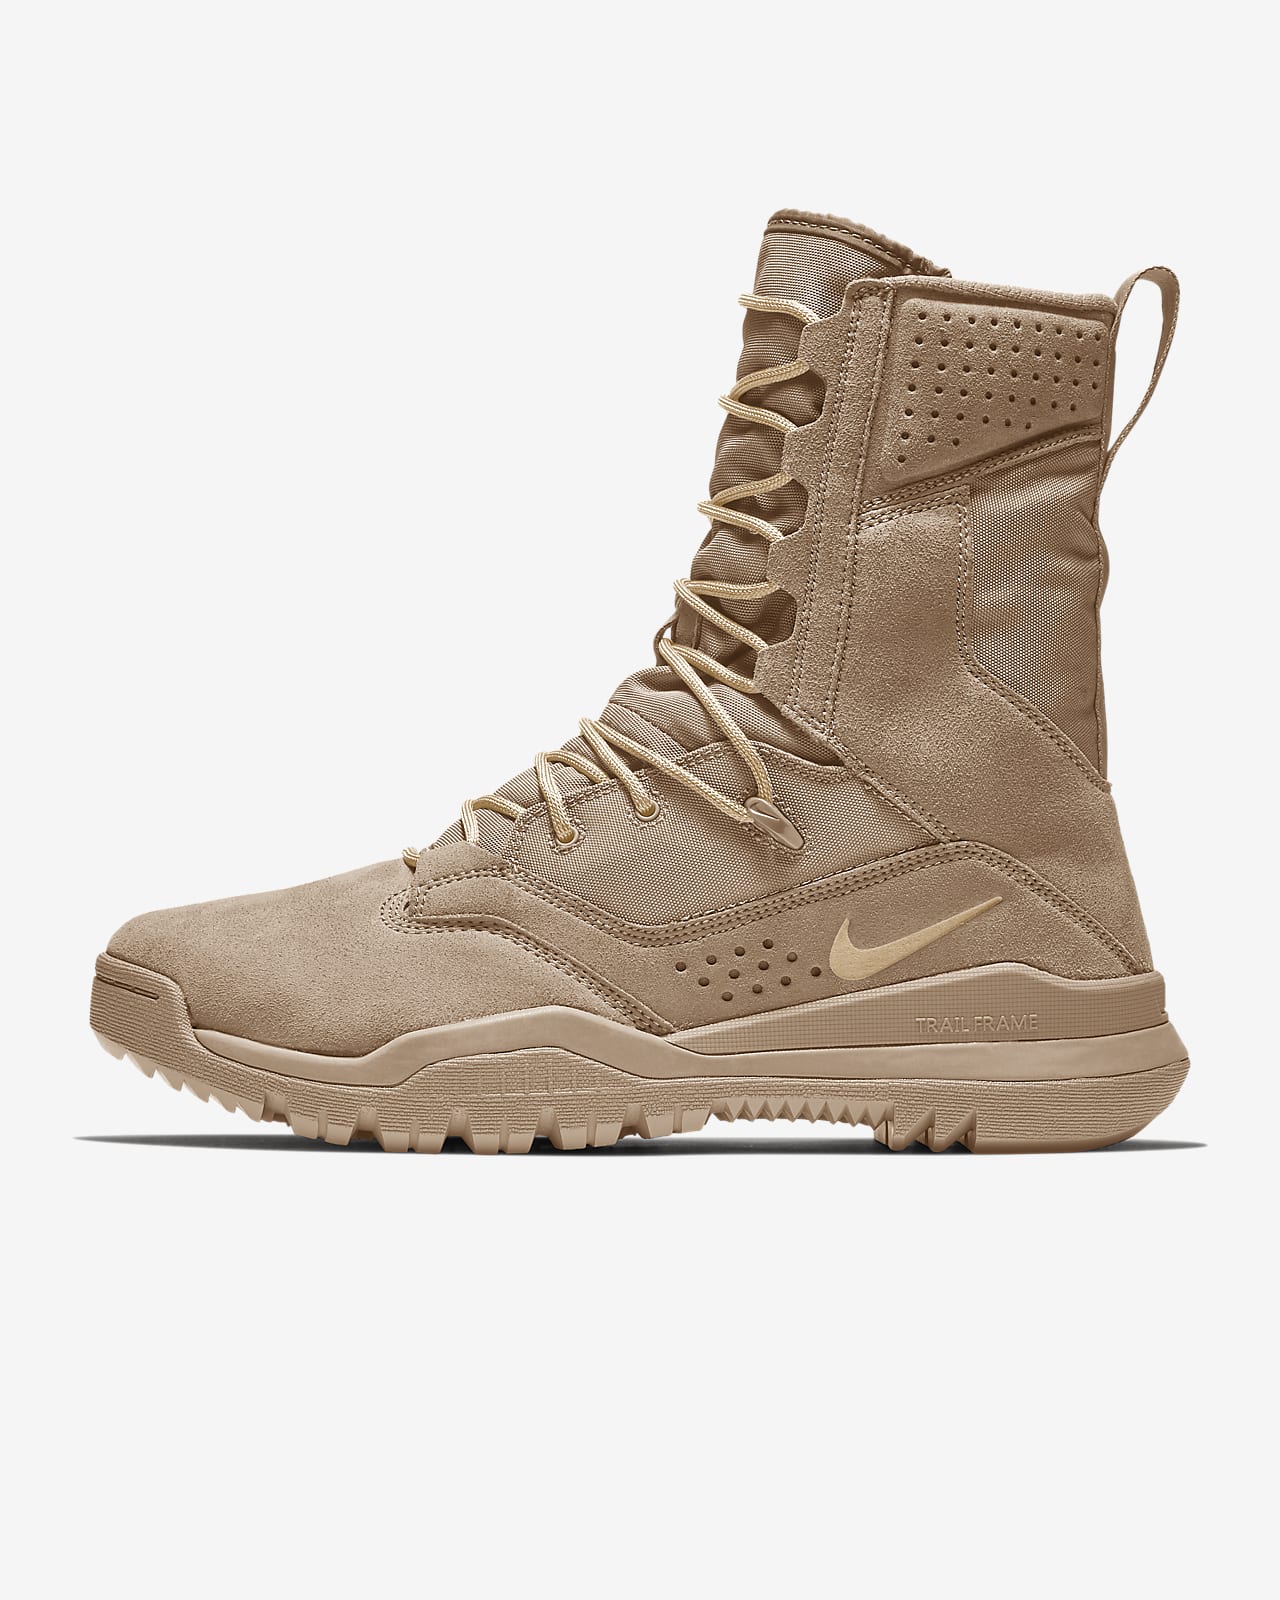 nike tactical boots canada